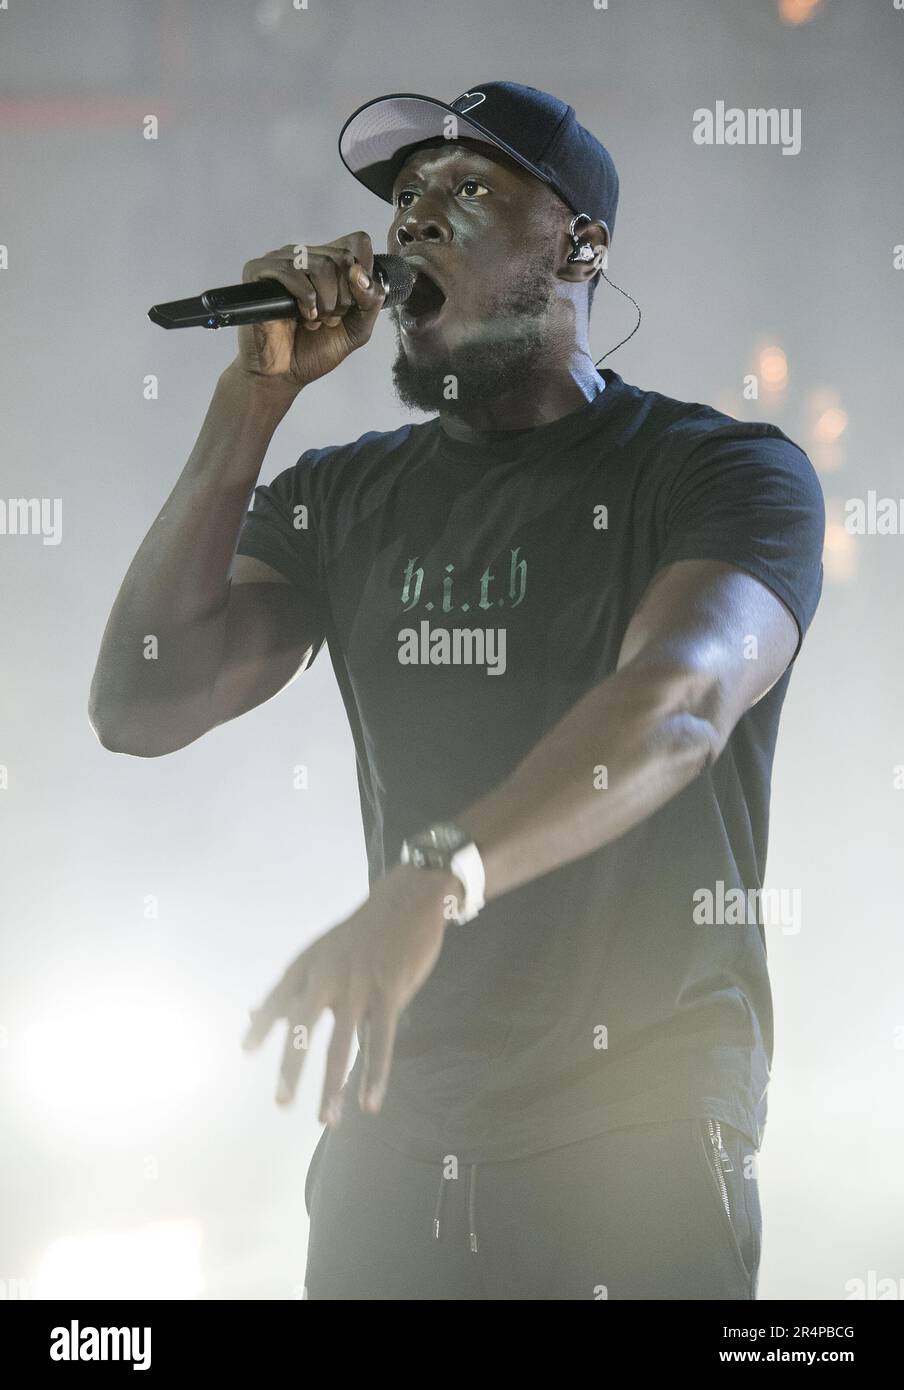 File photo dated 01/11/2020 of Stormzy performing during the McDonald's Presents: I'm Lovin' it Live music festival via the My McDonald's App, at the Printworks London. Stormzy has said having 'the greatest music on Earth' coming out of Africa is 'inspiring'. The 29-year-old British rapper, who has had three UK number ones including Vossi Bop, has previously spoken about his Ghanese heritage along with his support of the country during the World Cup in Qatar last year. Issue date: Monday May 29, 2023. Stock Photo